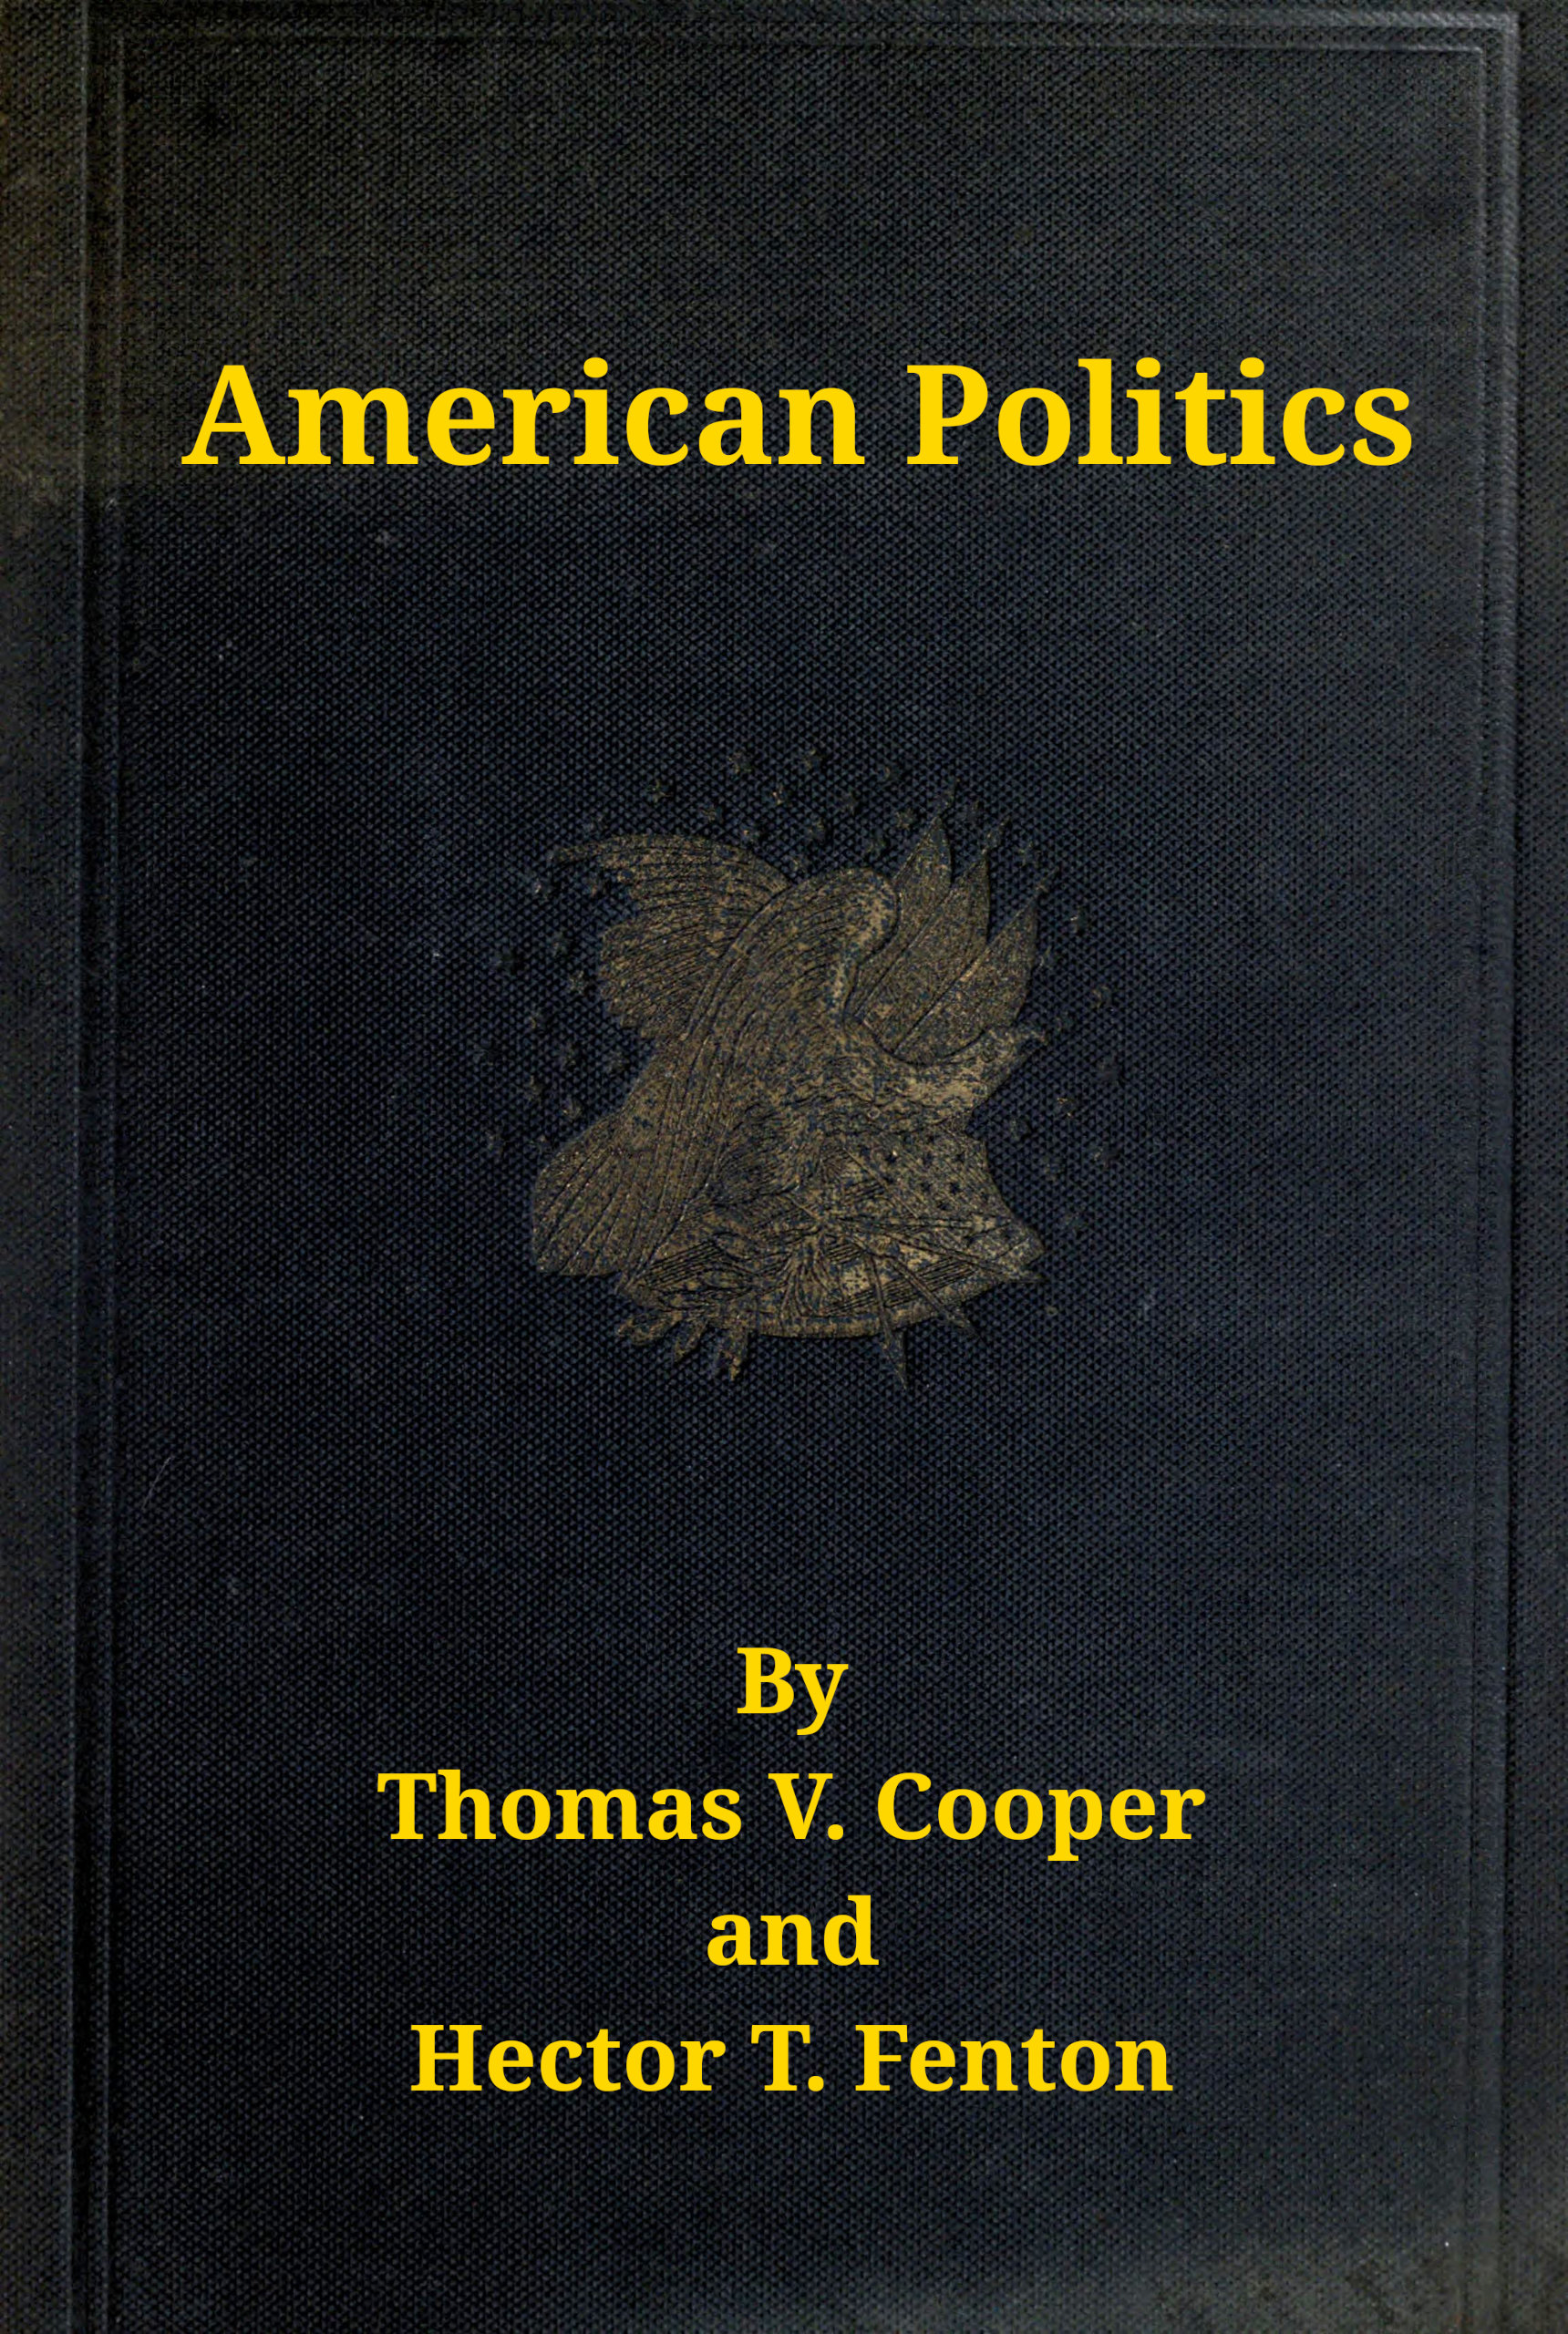 American politics (non-partisan) from the beginning to date